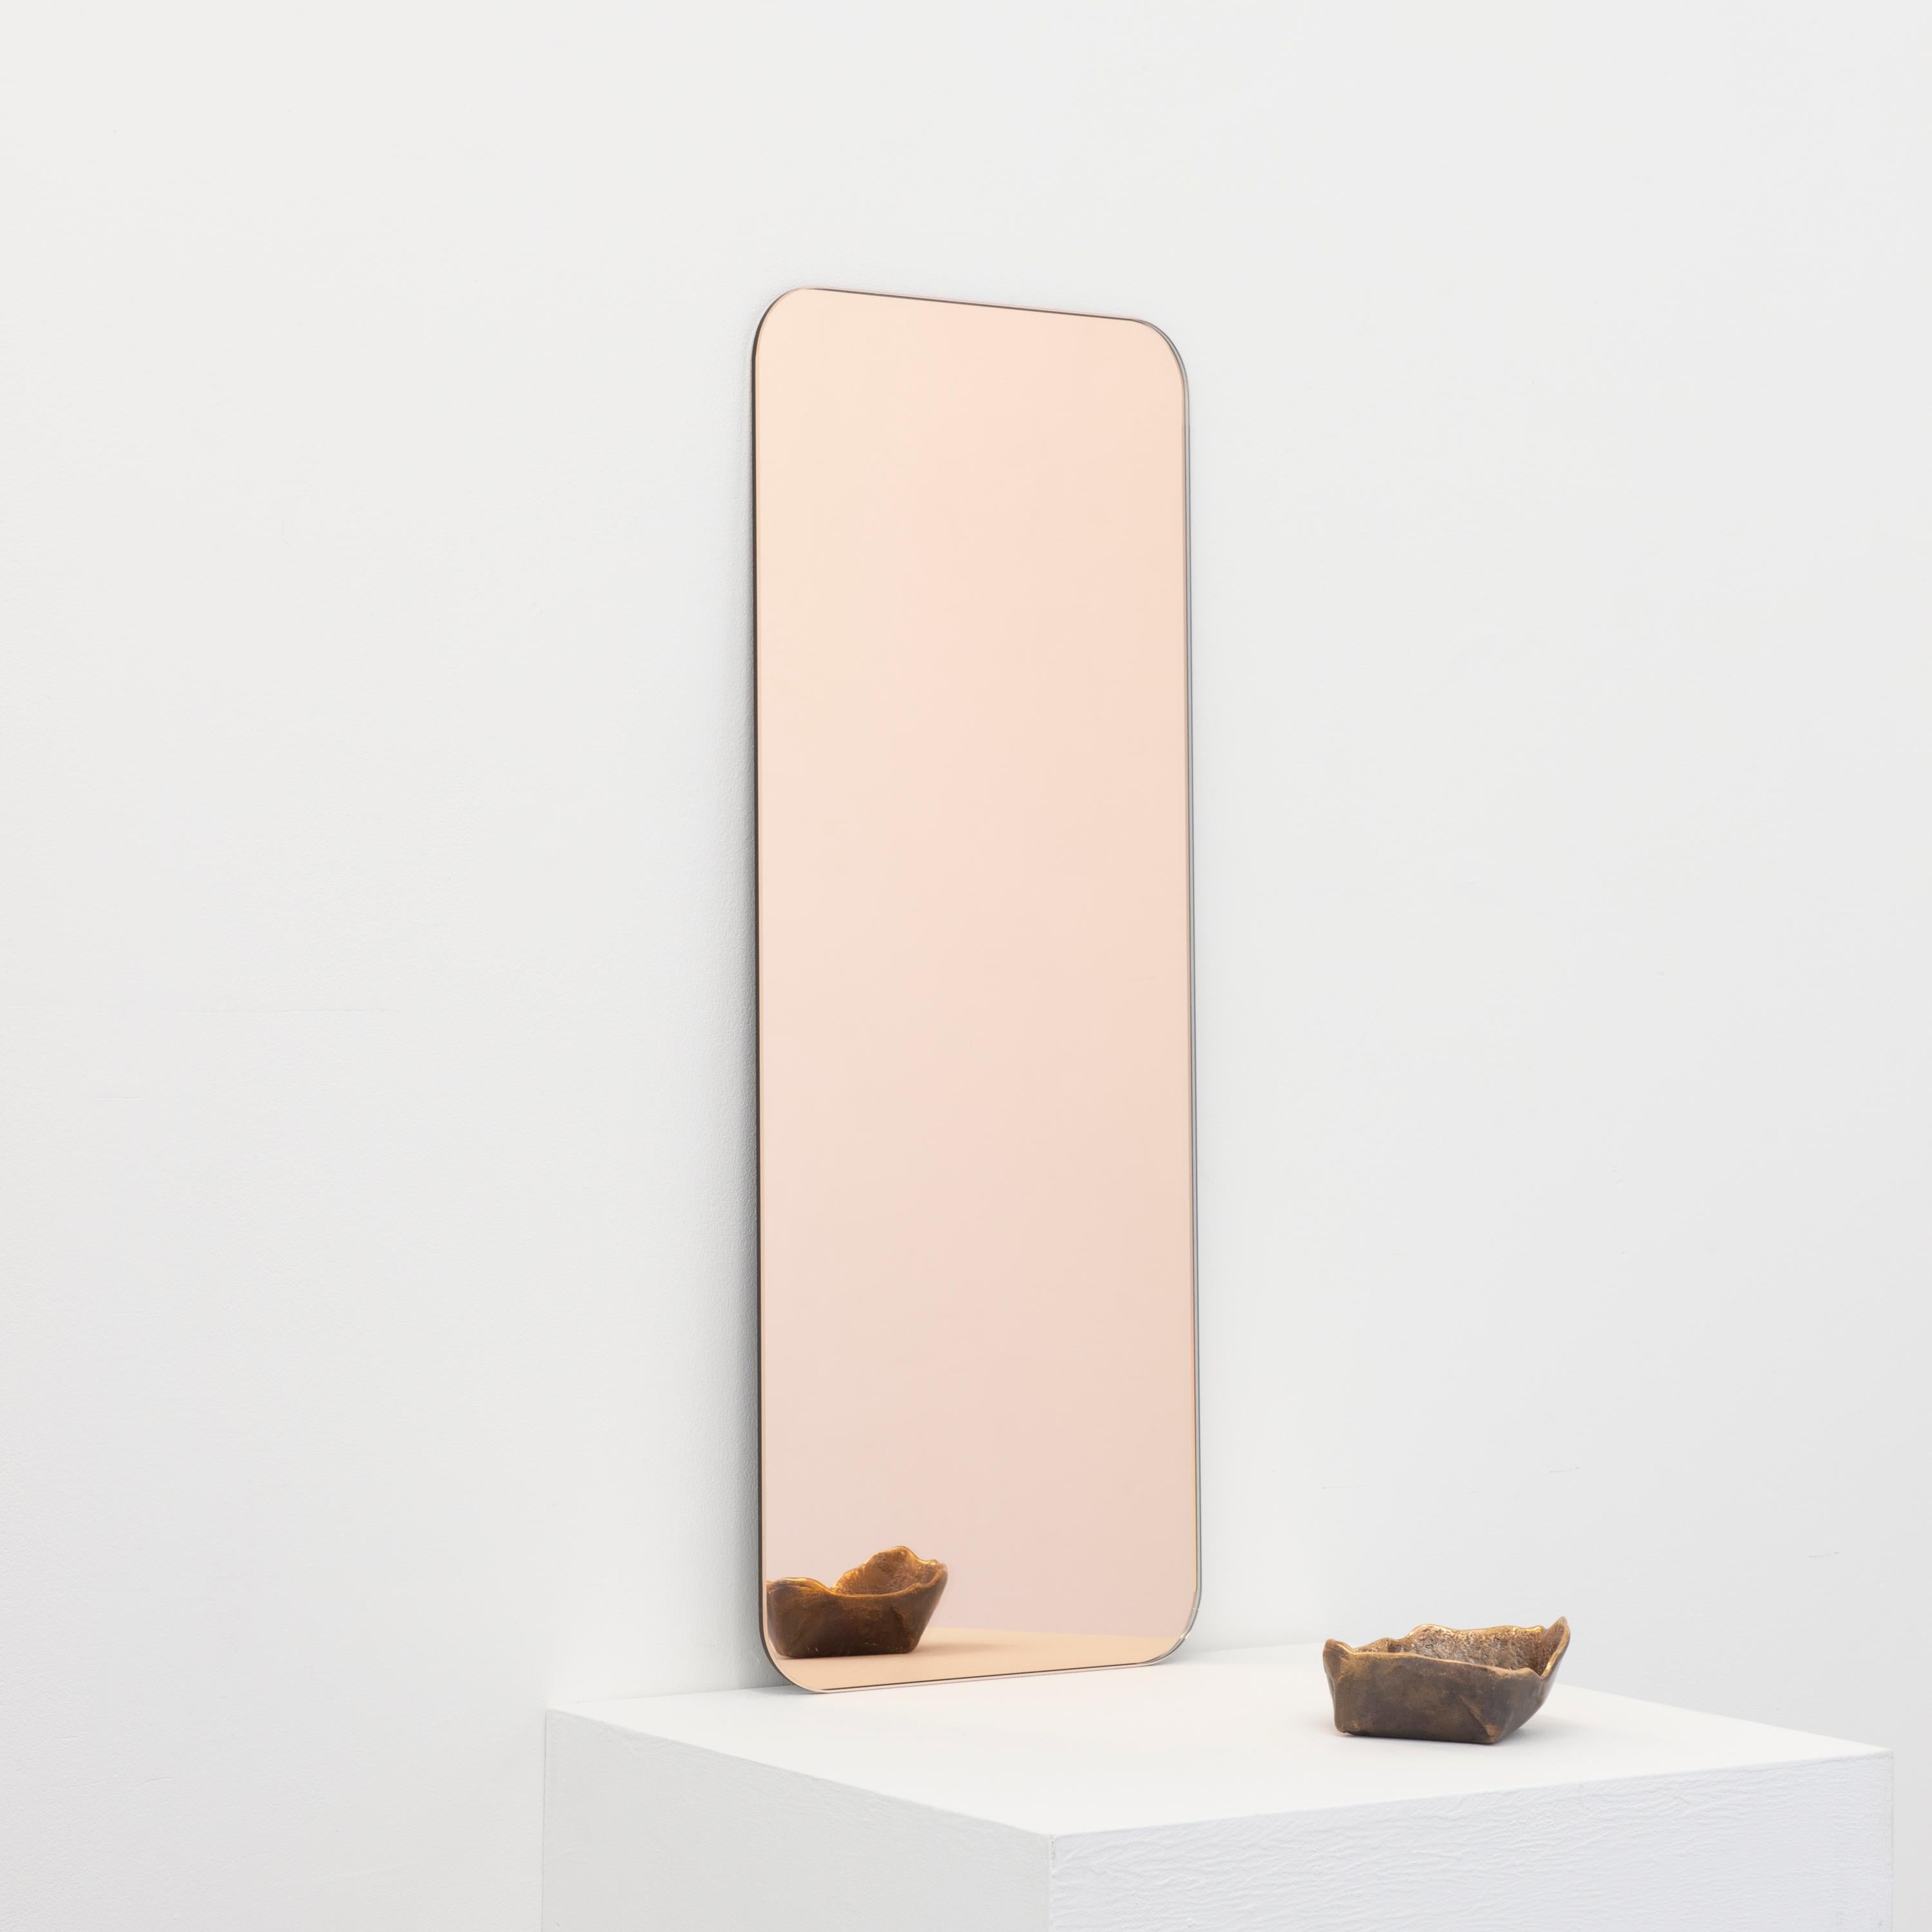 Minimalist rectangular shaped frameless rose gold tinted mirror with a floating effect. Quality design that ensures the mirror sits perfectly parallel to the wall. Designed and made in London, UK.

Fitted with professional plates not visible once